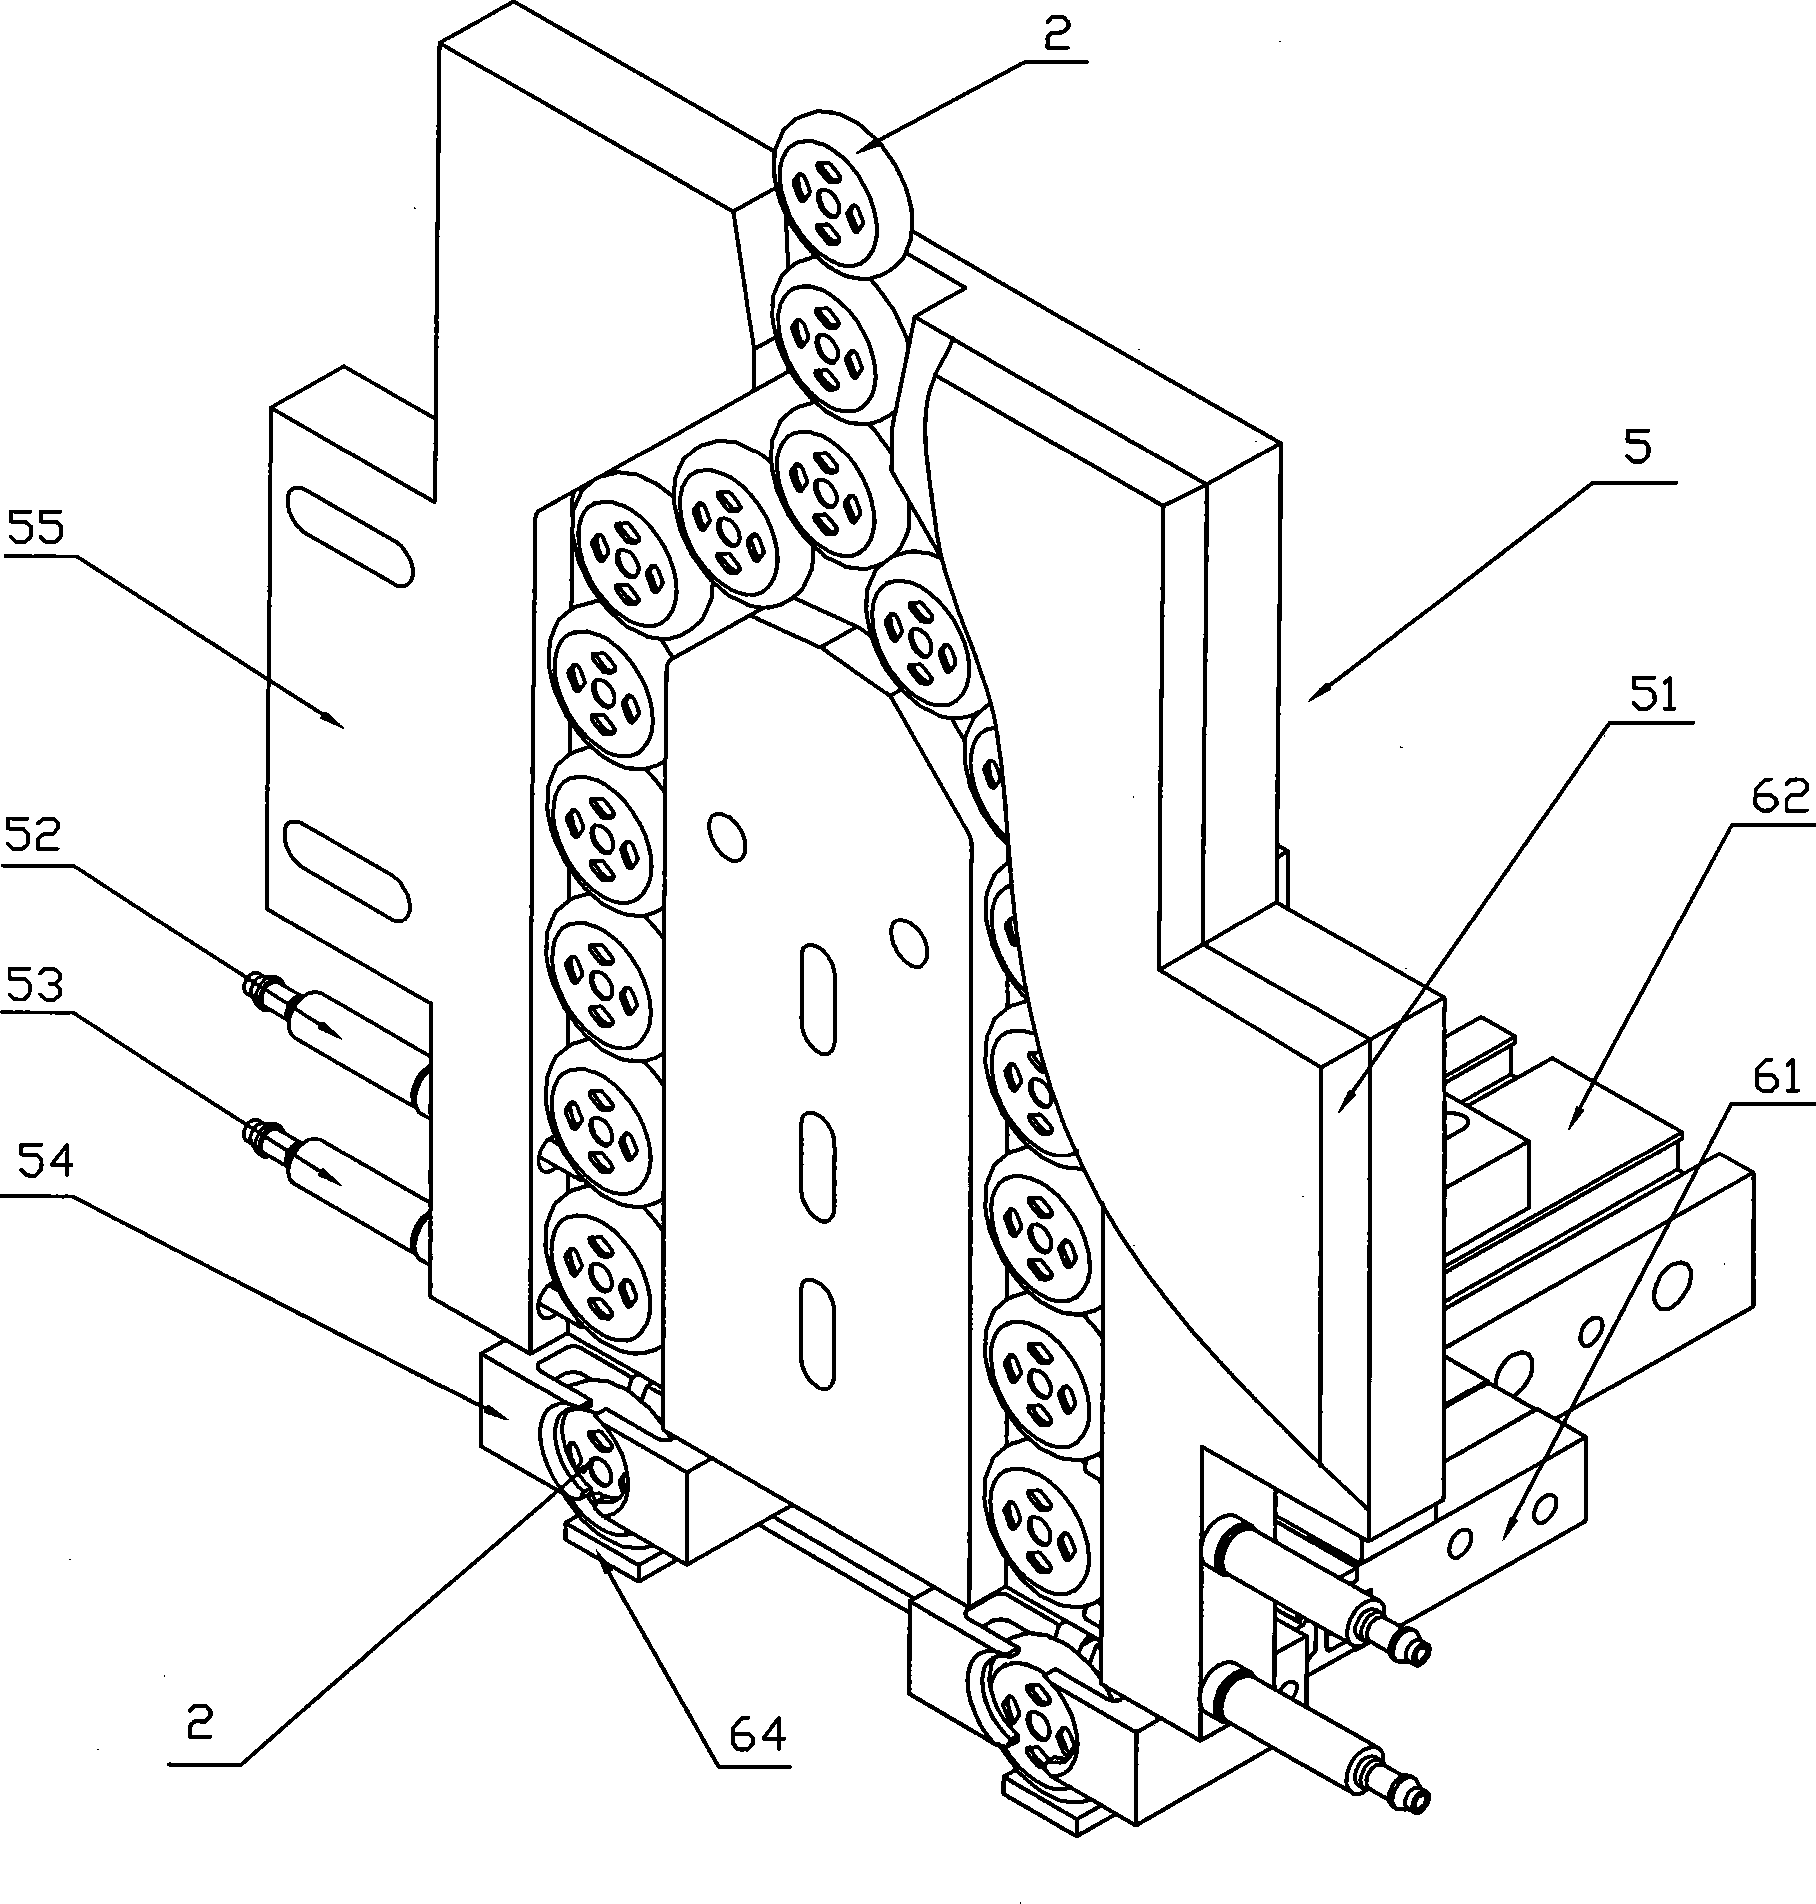 Spot welding device for battery cap and tab